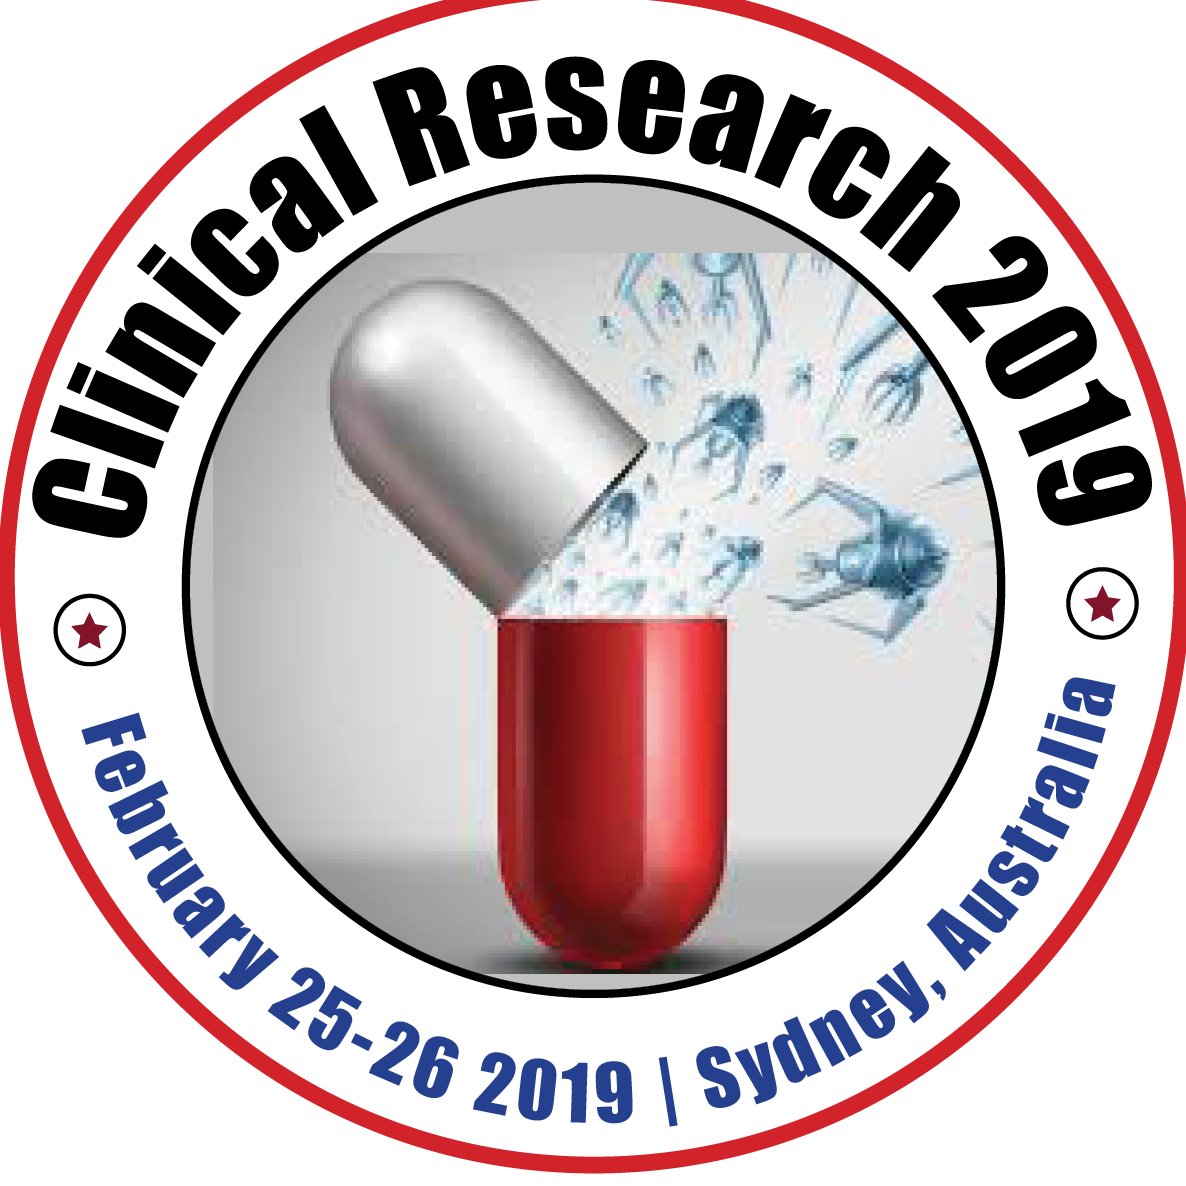 #clinical_Research #clinical_trails #clinical #drugs